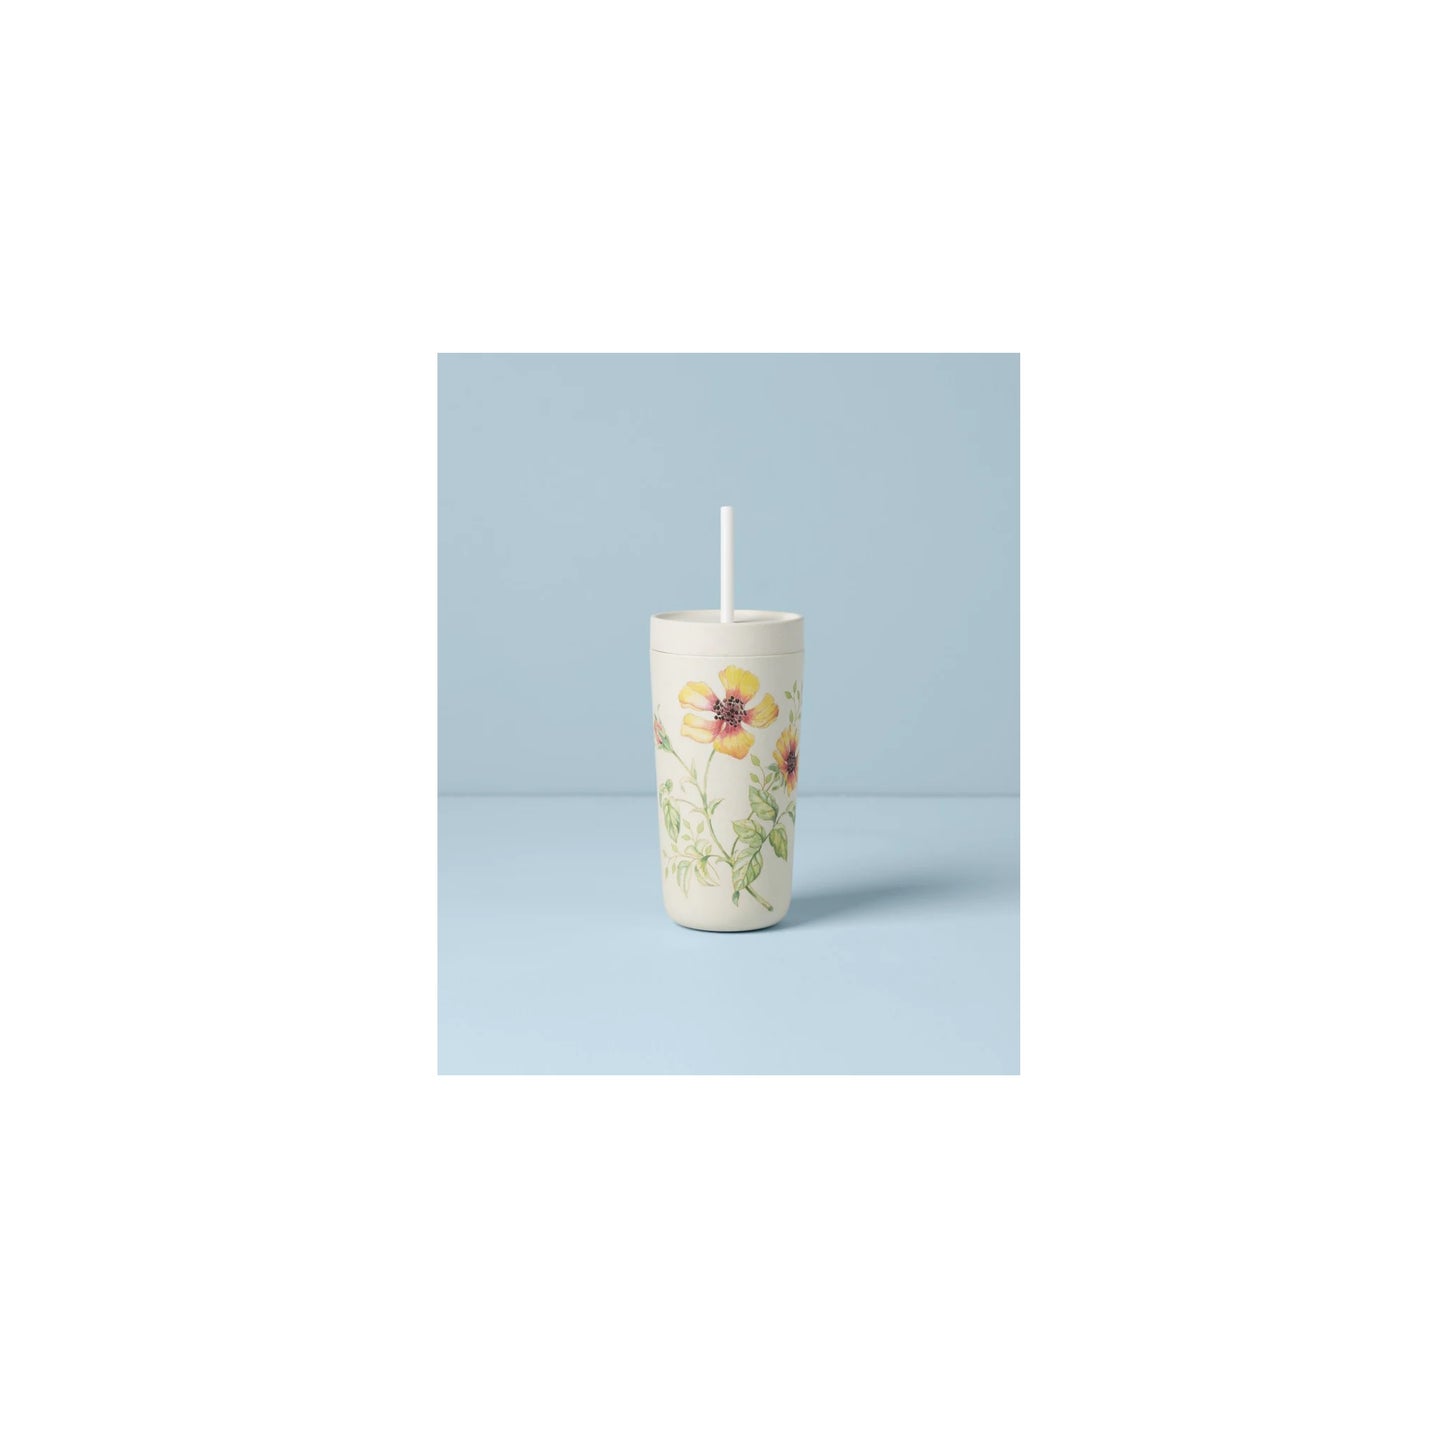 Lenox Butterfly Meadow Bamboo Tumbler With Straw